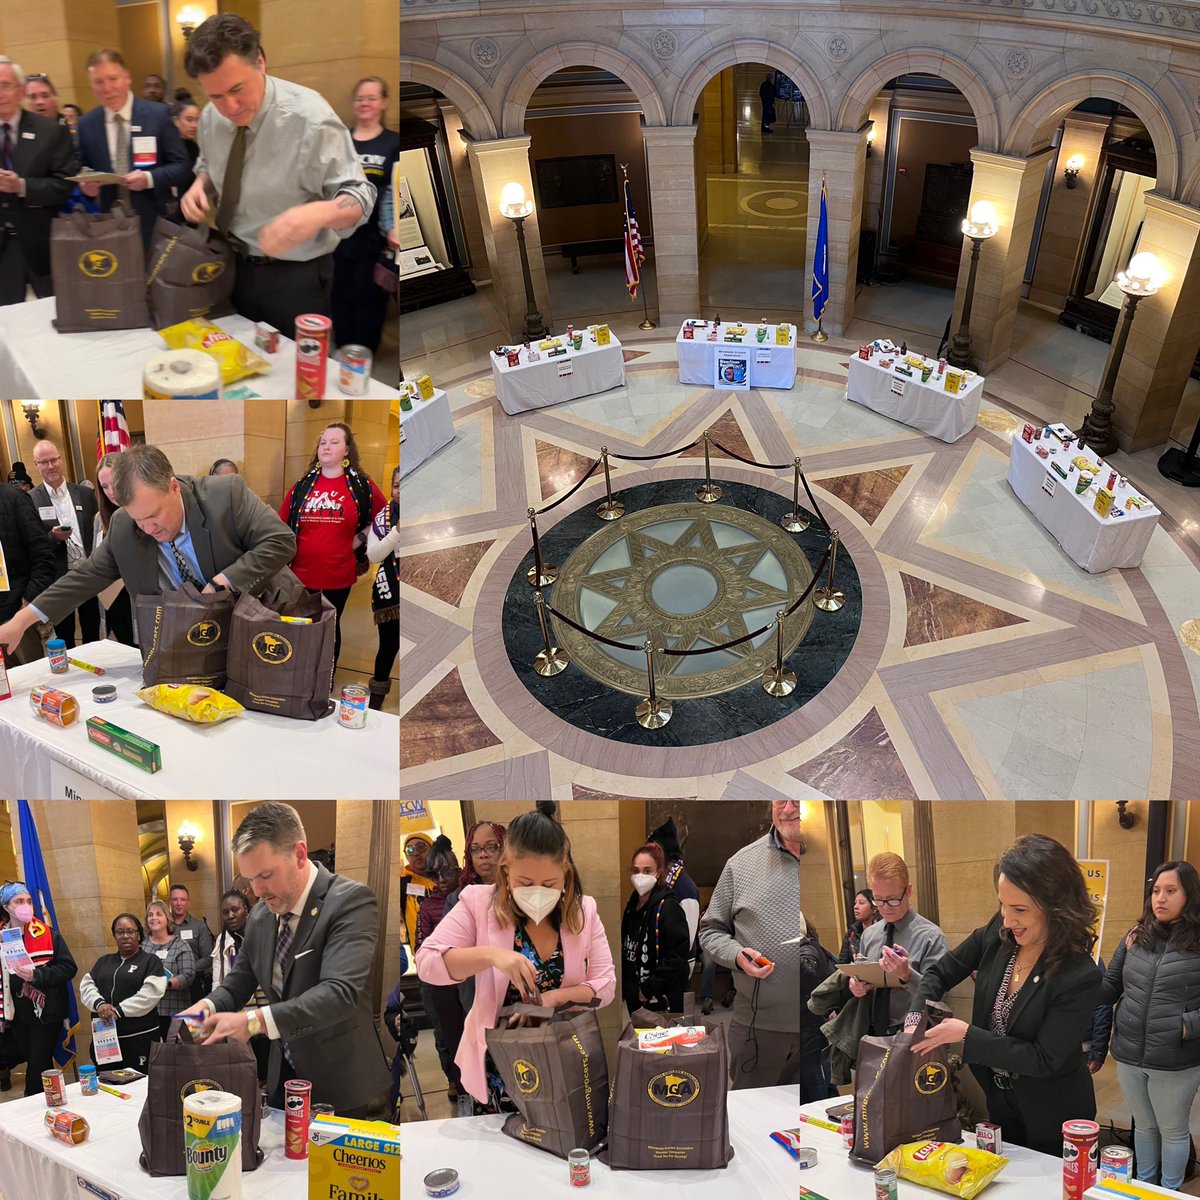 It was a close competition at the Bipartisan Bag-Off between @LisaDemuthMN, @Senmarkjohnson, @AricForMN, @SamSencerMura, and @ThommyPetersen #2023MNBagOff #mnleg